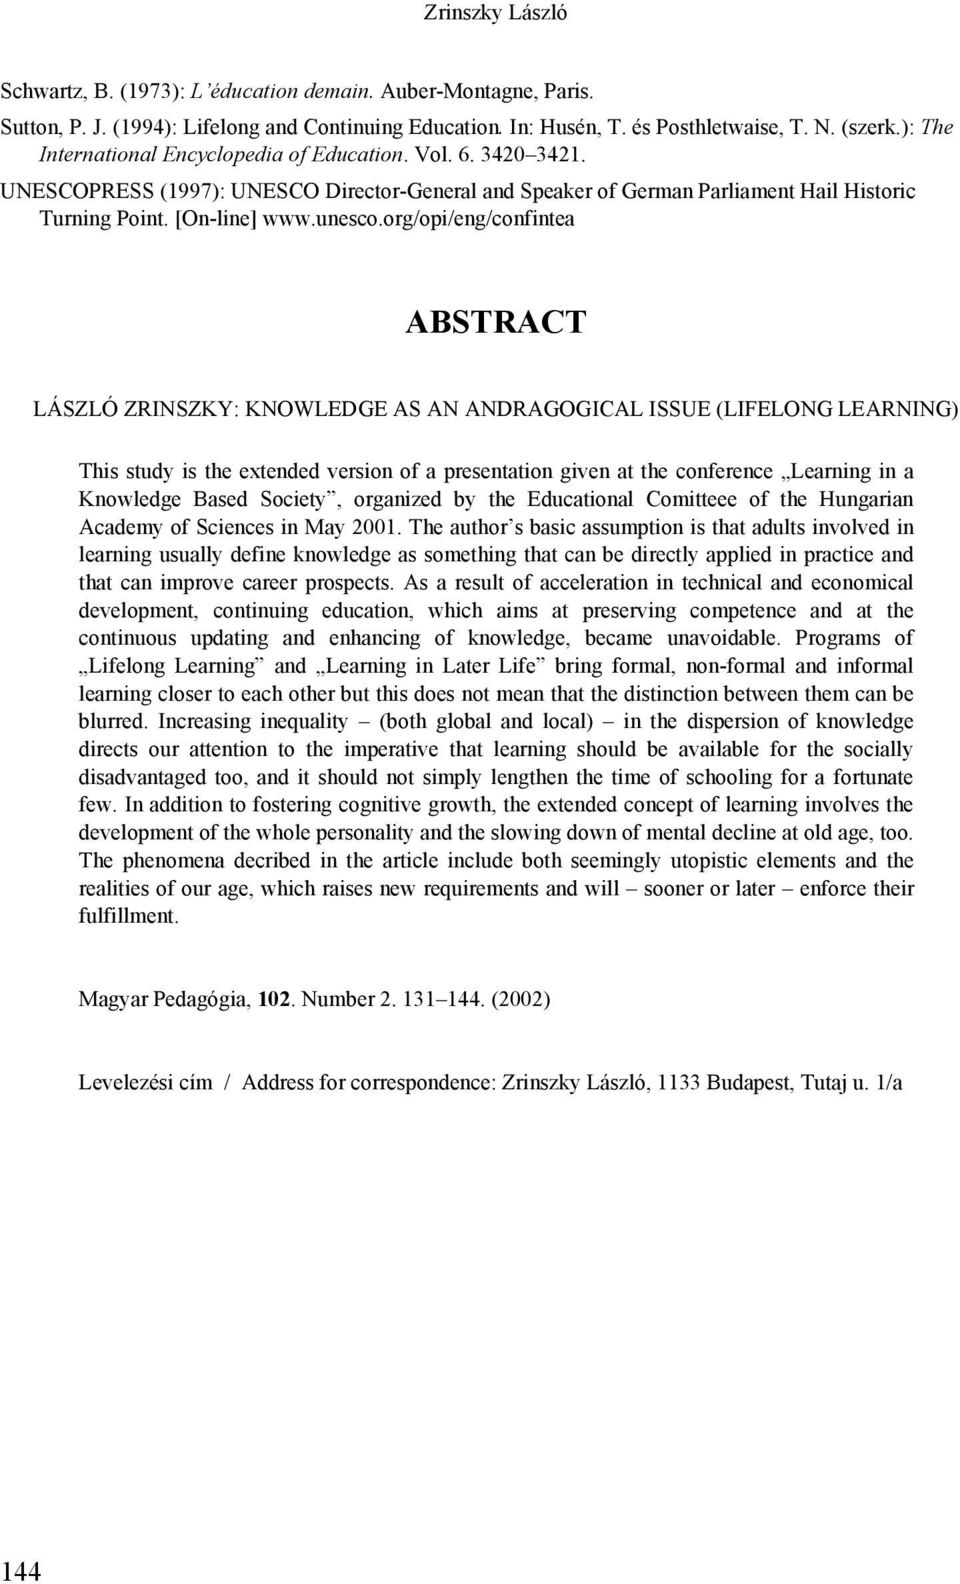 org/opi/eng/confintea ABSTRACT LÁSZLÓ ZRINSZKY: KNOWLEDGE AS AN ANDRAGOGICAL ISSUE (LIFELONG LEARNING) This study is the extended version of a presentation given at the conference Learning in a